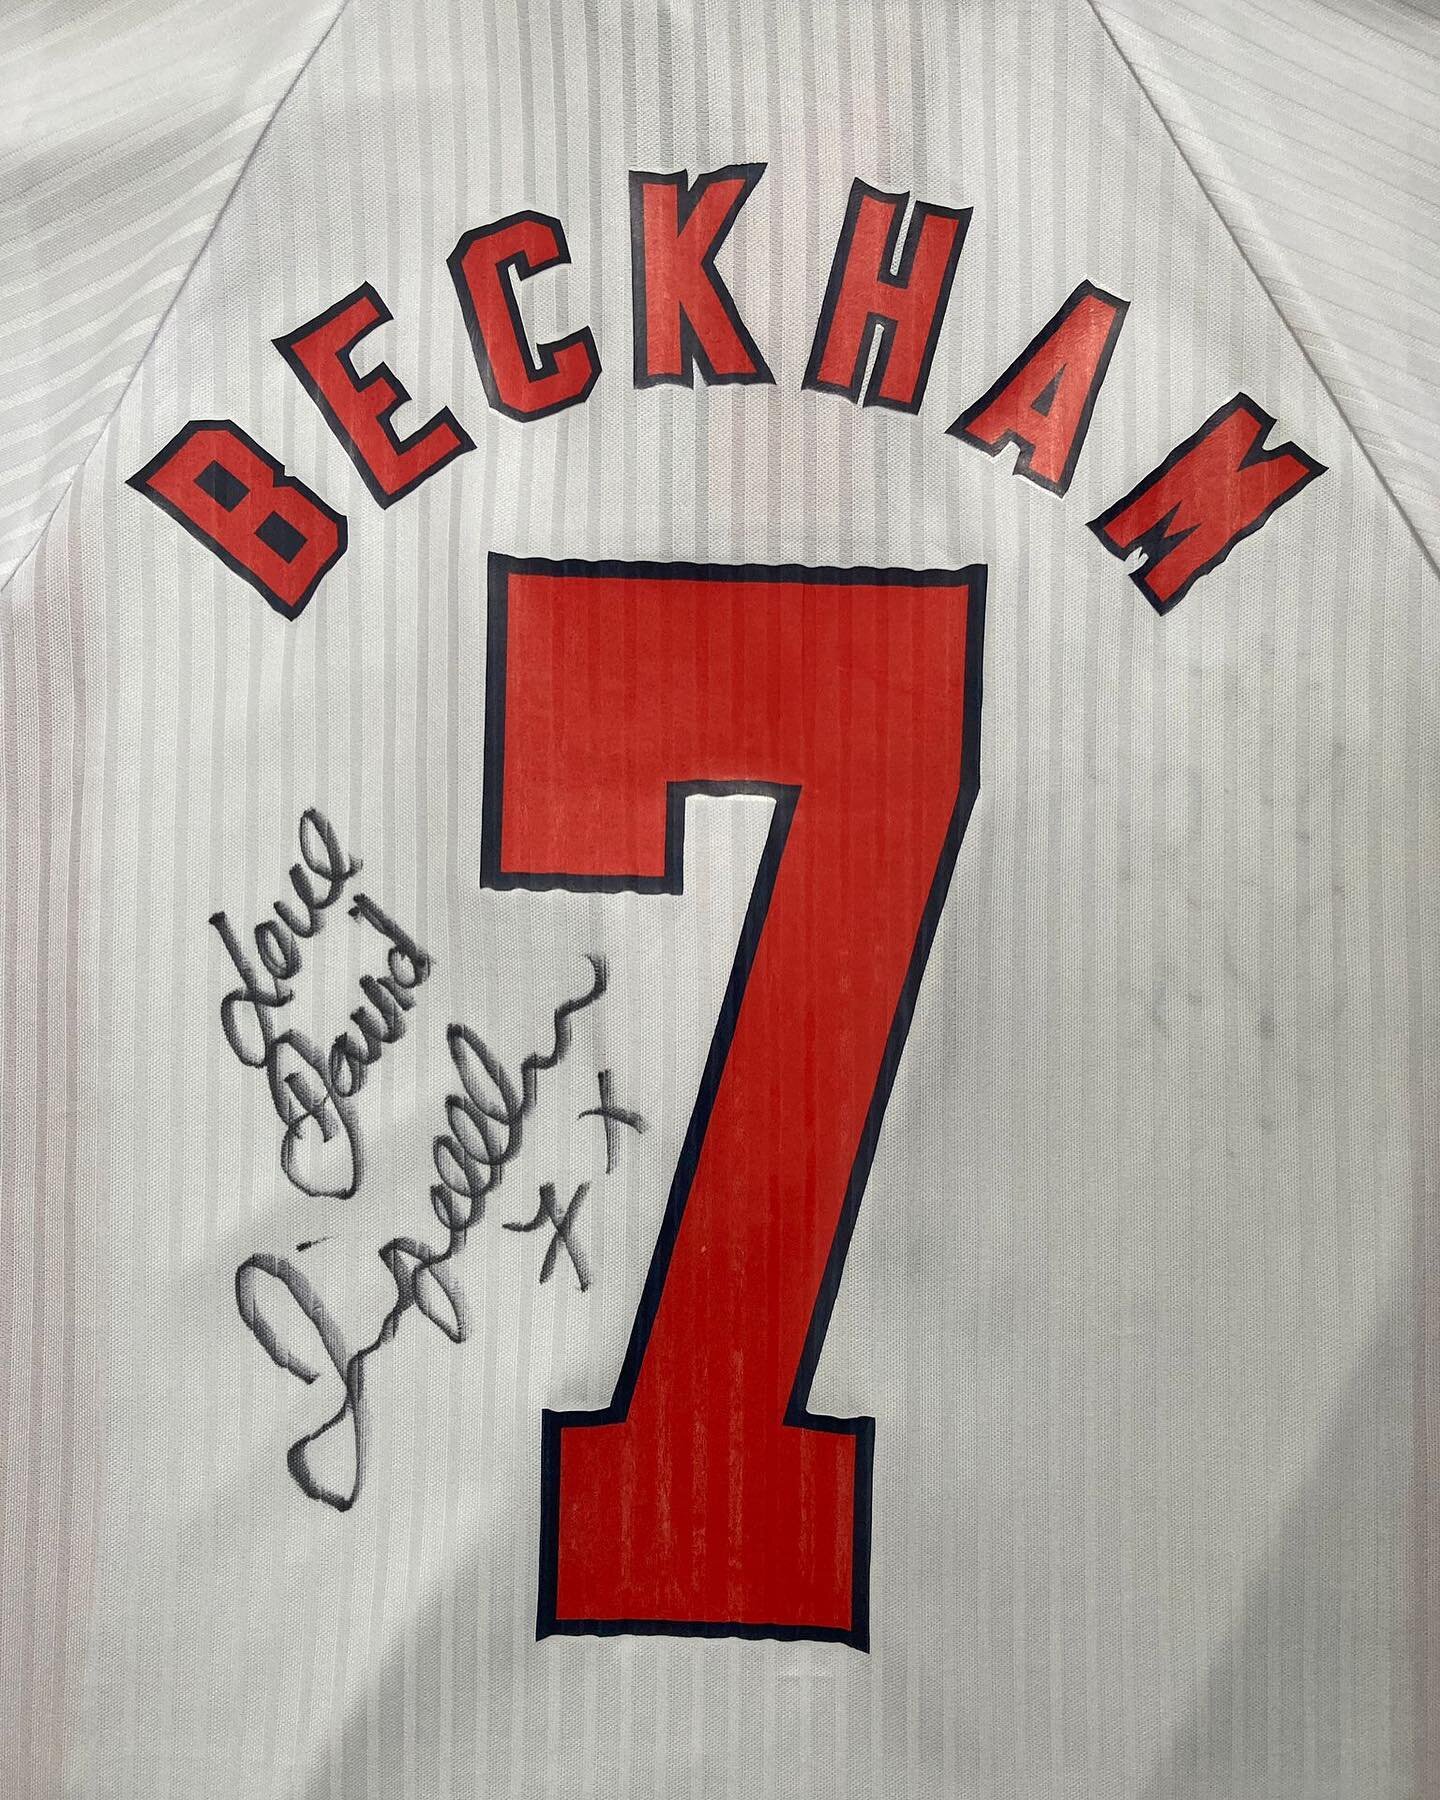 Breaking news 📣📣📣
&nbsp;
An amazing new prize for the PSA's Summer Raffle is just in!
&nbsp;
For your chance to win an England World Cup 1998 No. 7 Home Shirt FRESHLY SIGNED ON MONDAY BY @davidbeckham please visit&nbsp;link in profile.
&nbsp;
Tick